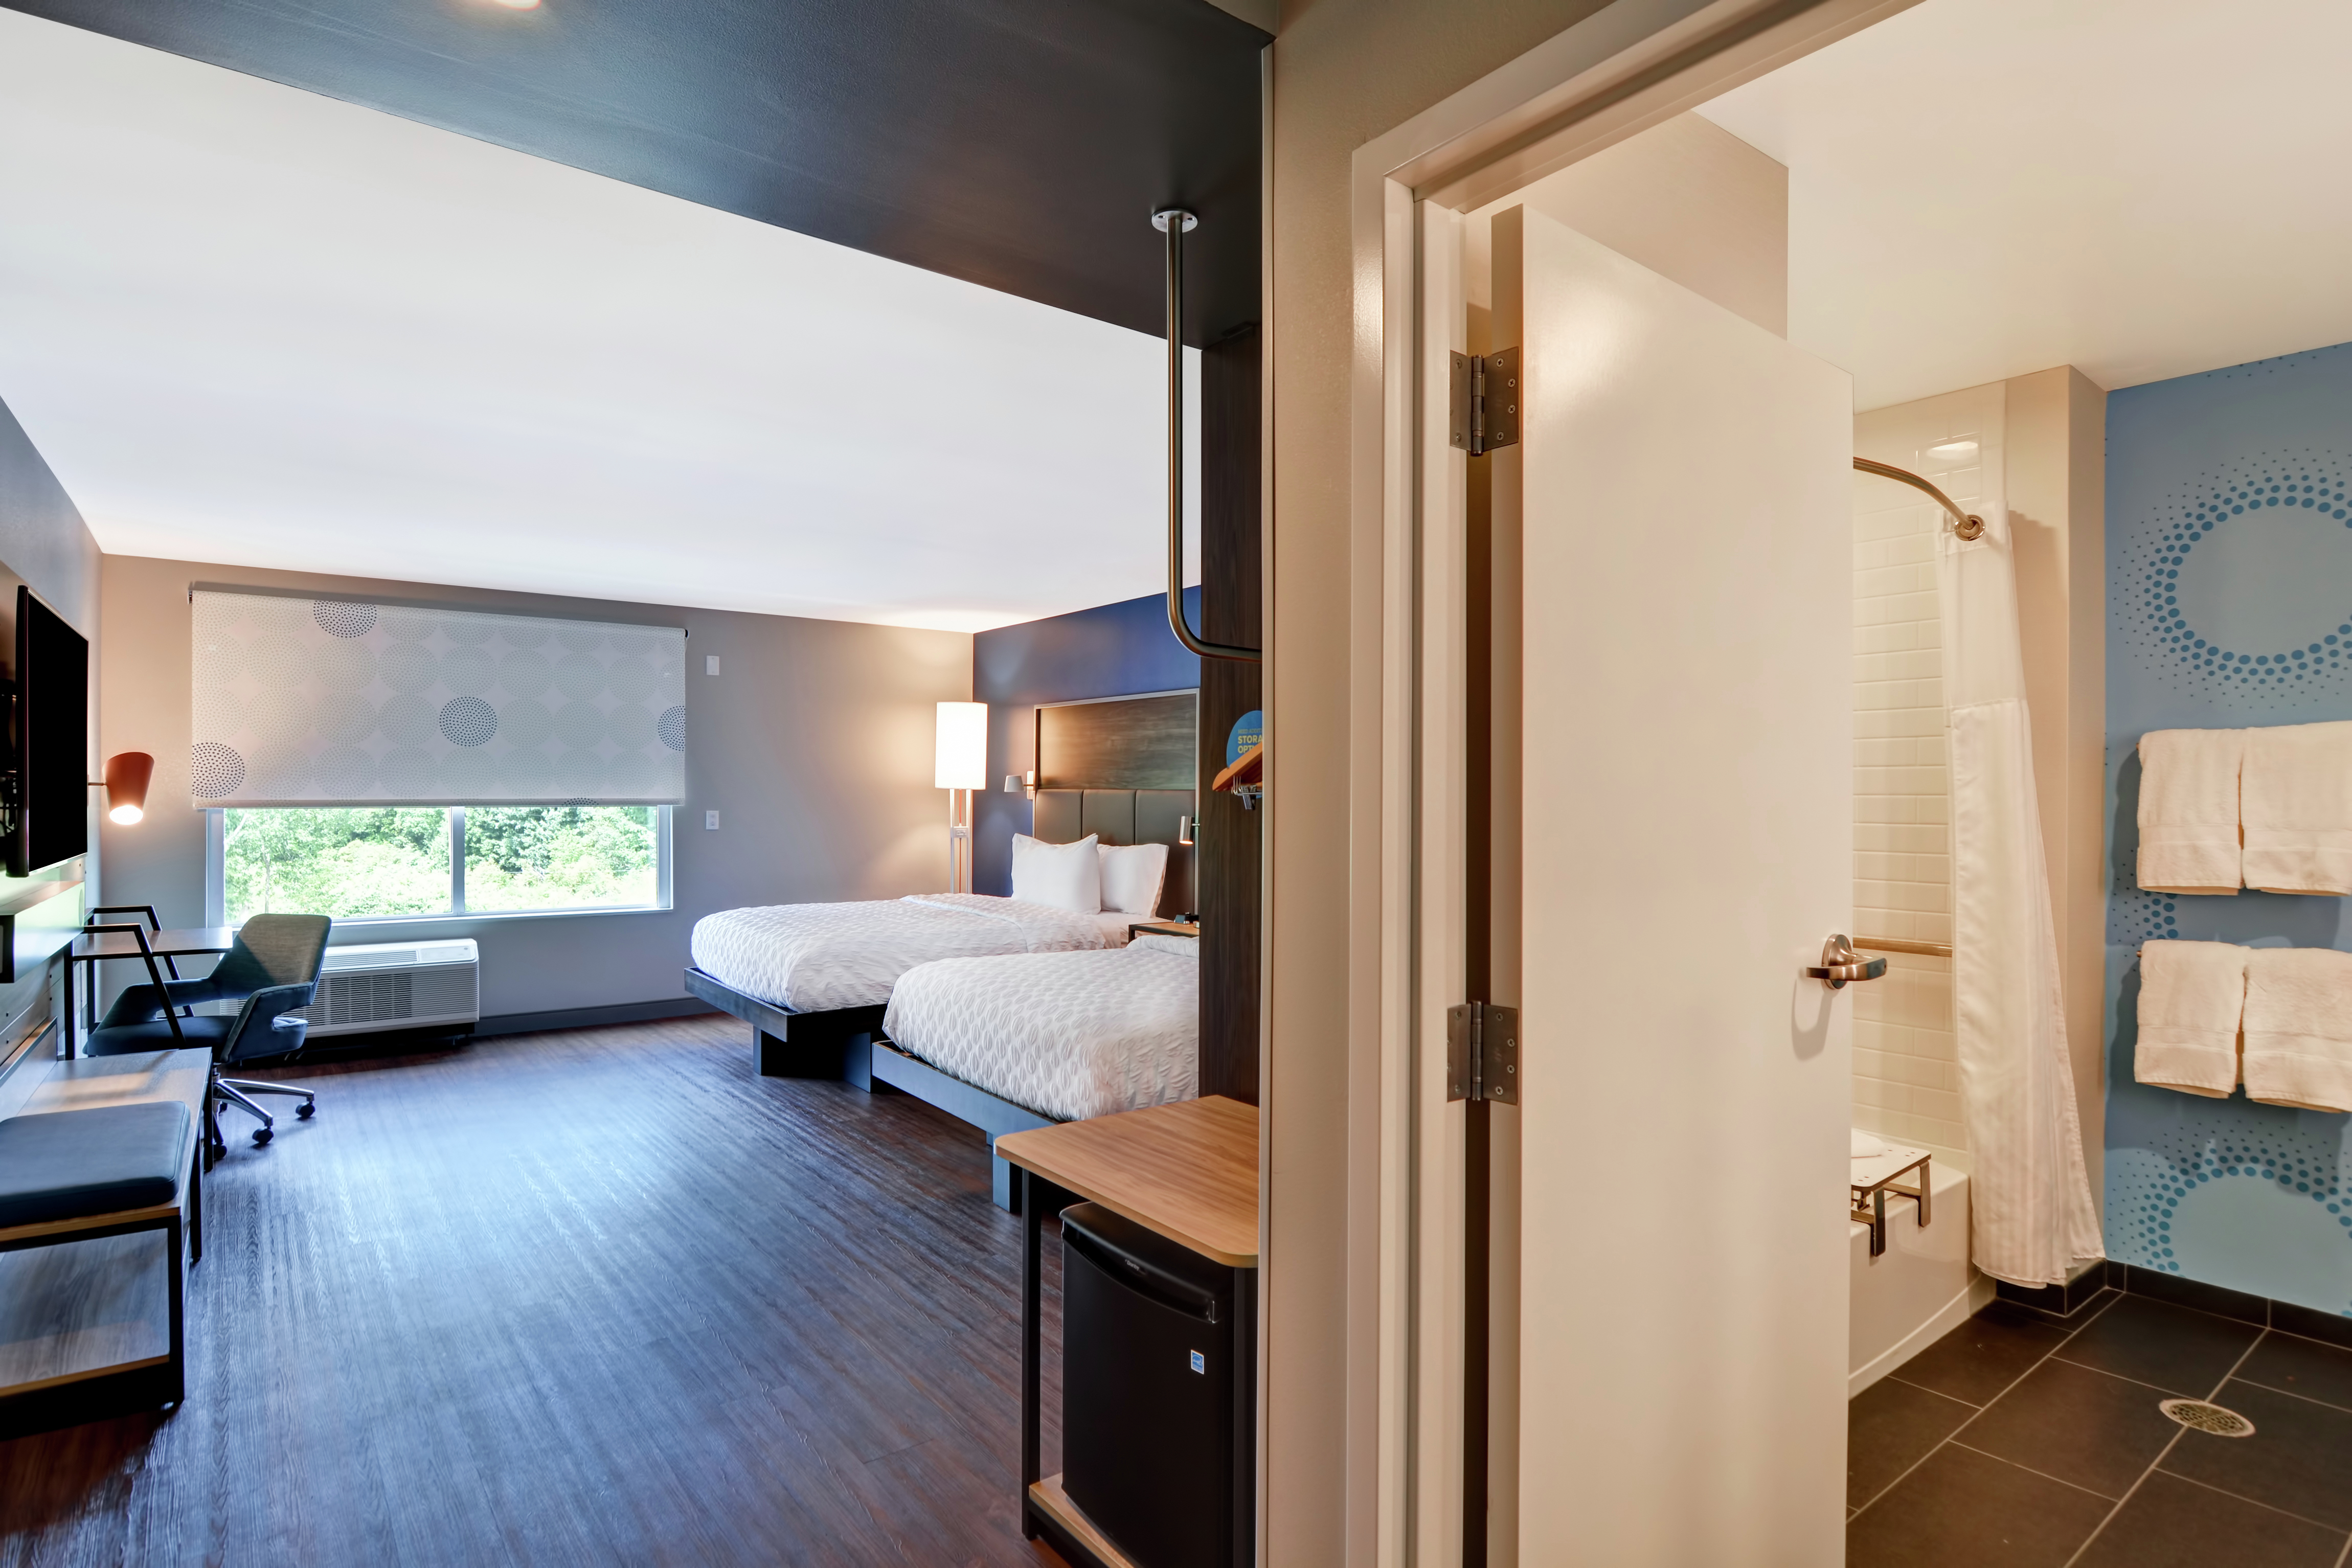 Accessible Guest Room with Double Queen Beds and Tub